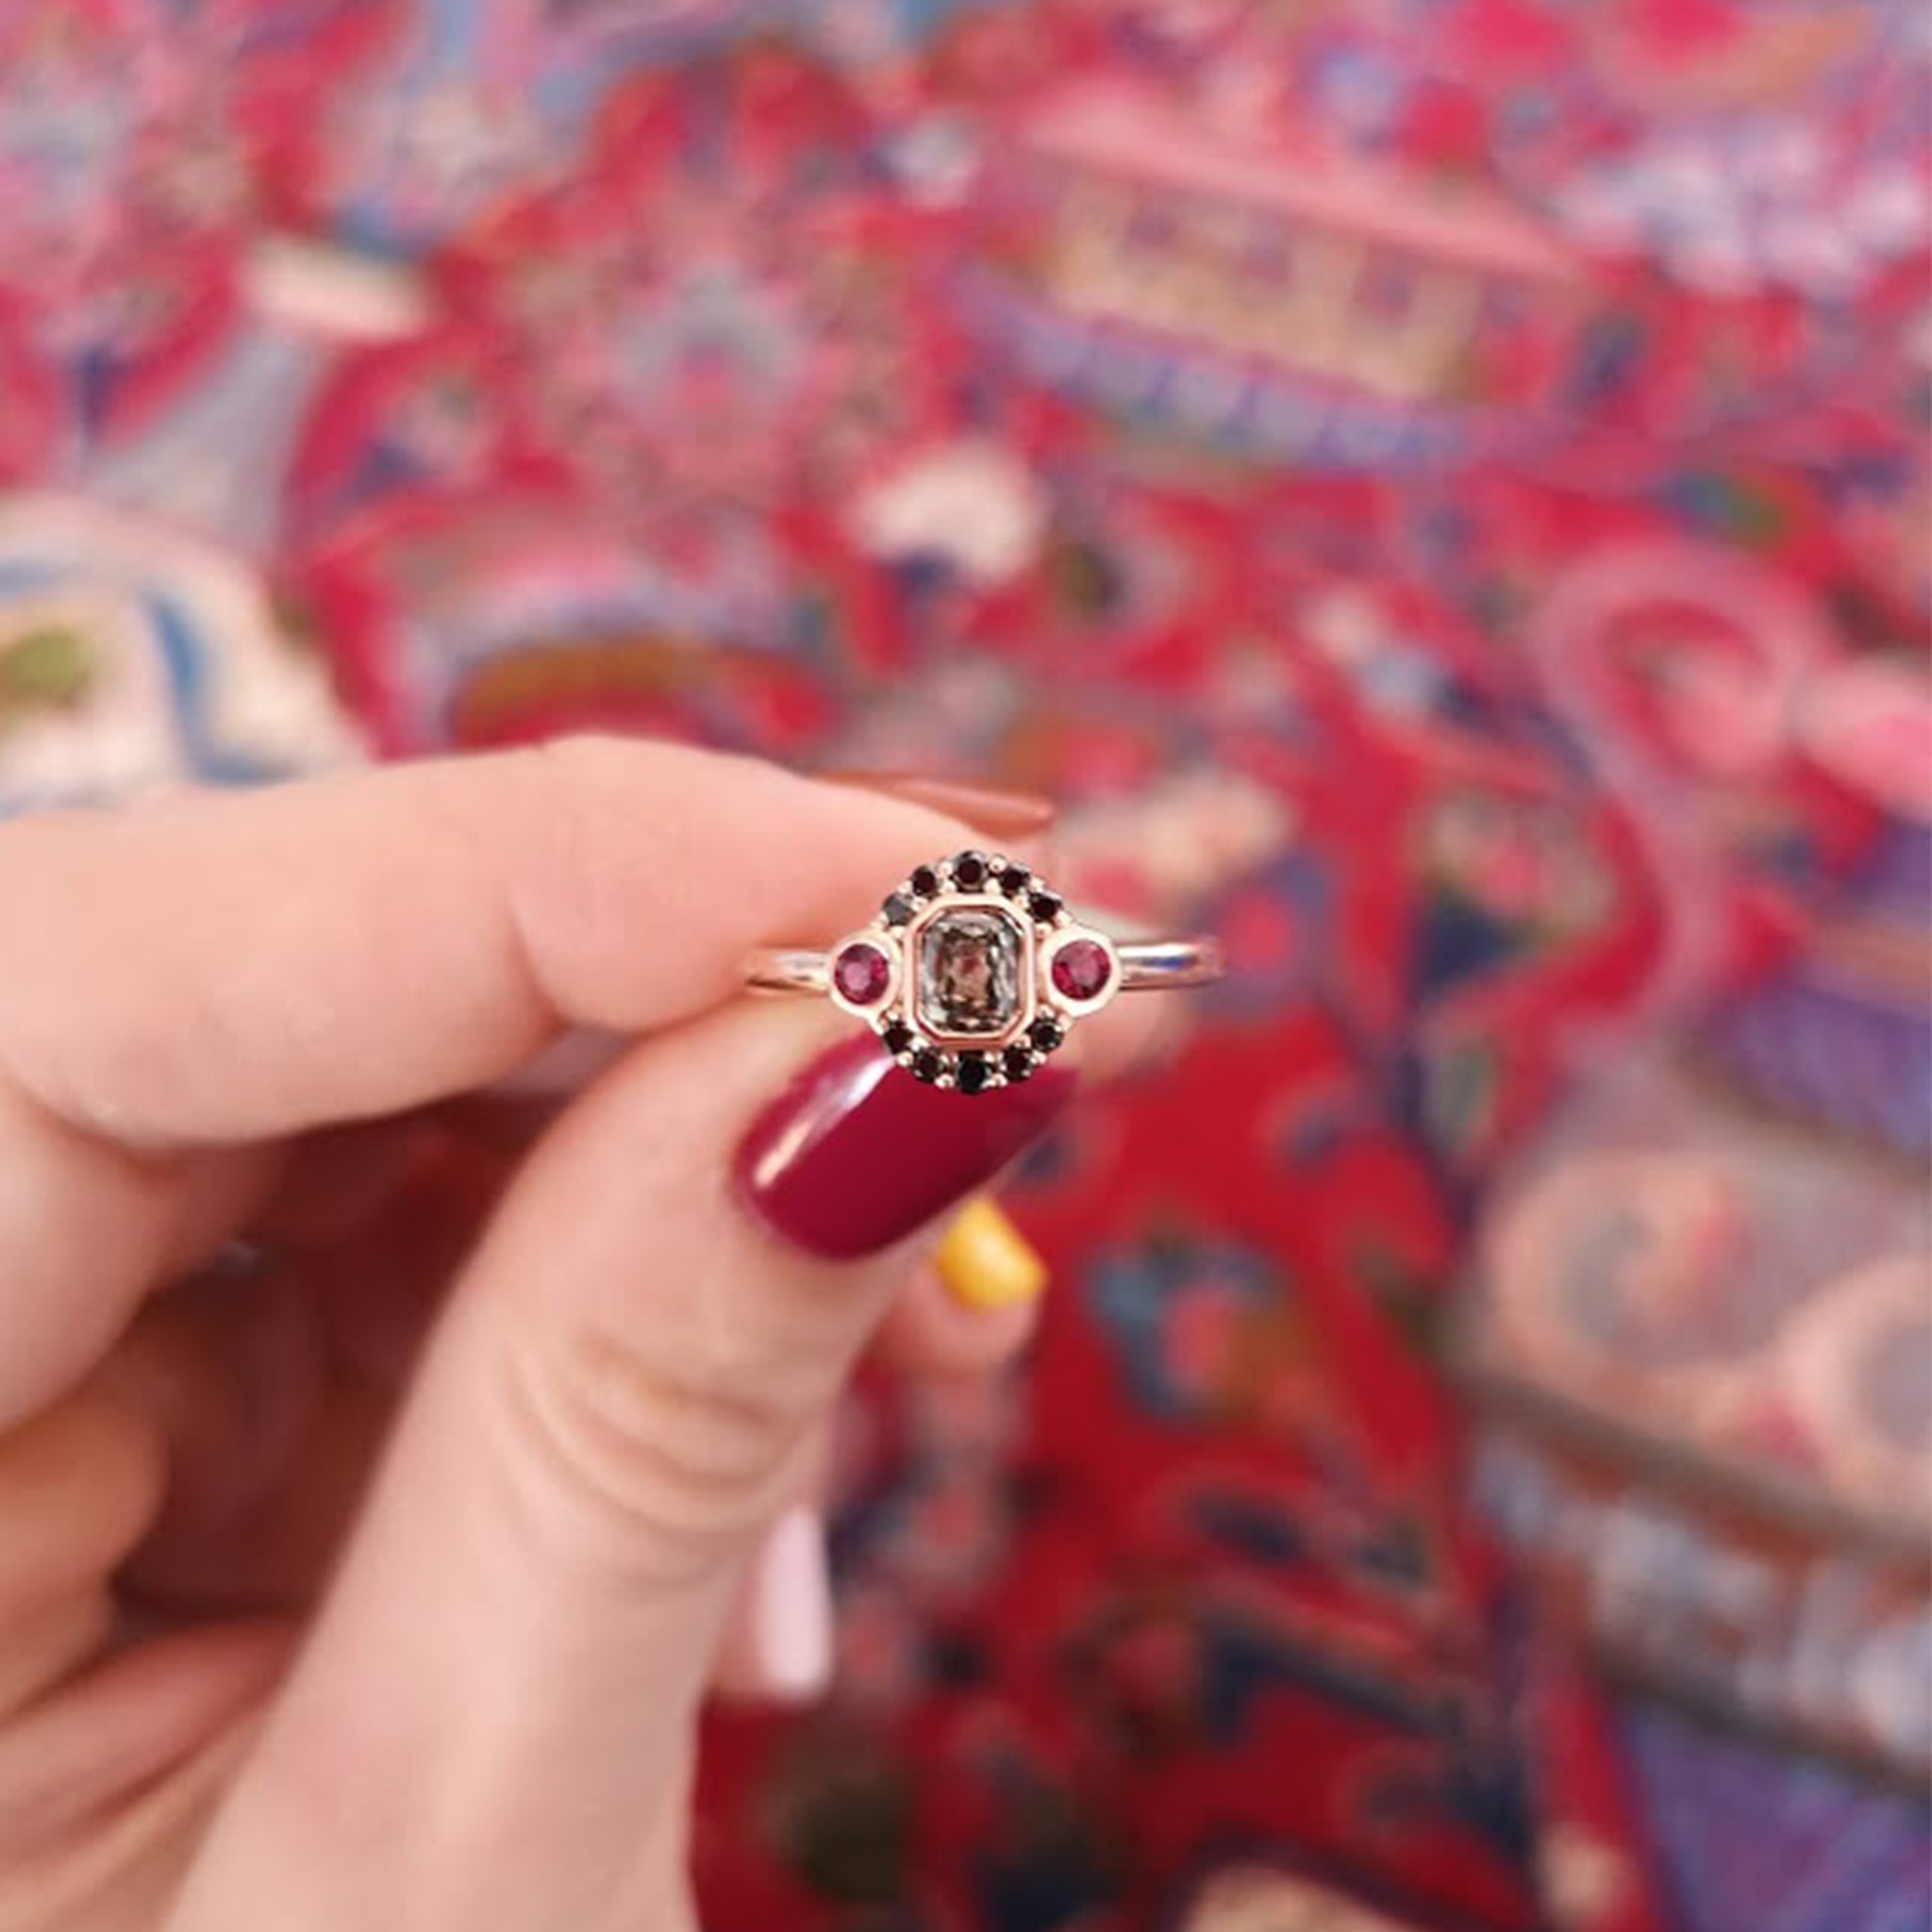 Woman holding La Couche du Diable ring from Lico Jewelry in Montreal, featuring a unique salt and pepper diamond surrounded by black diamonds and rubies set in 18k rose gold, with red nail polish and a beautiful carpet in the background